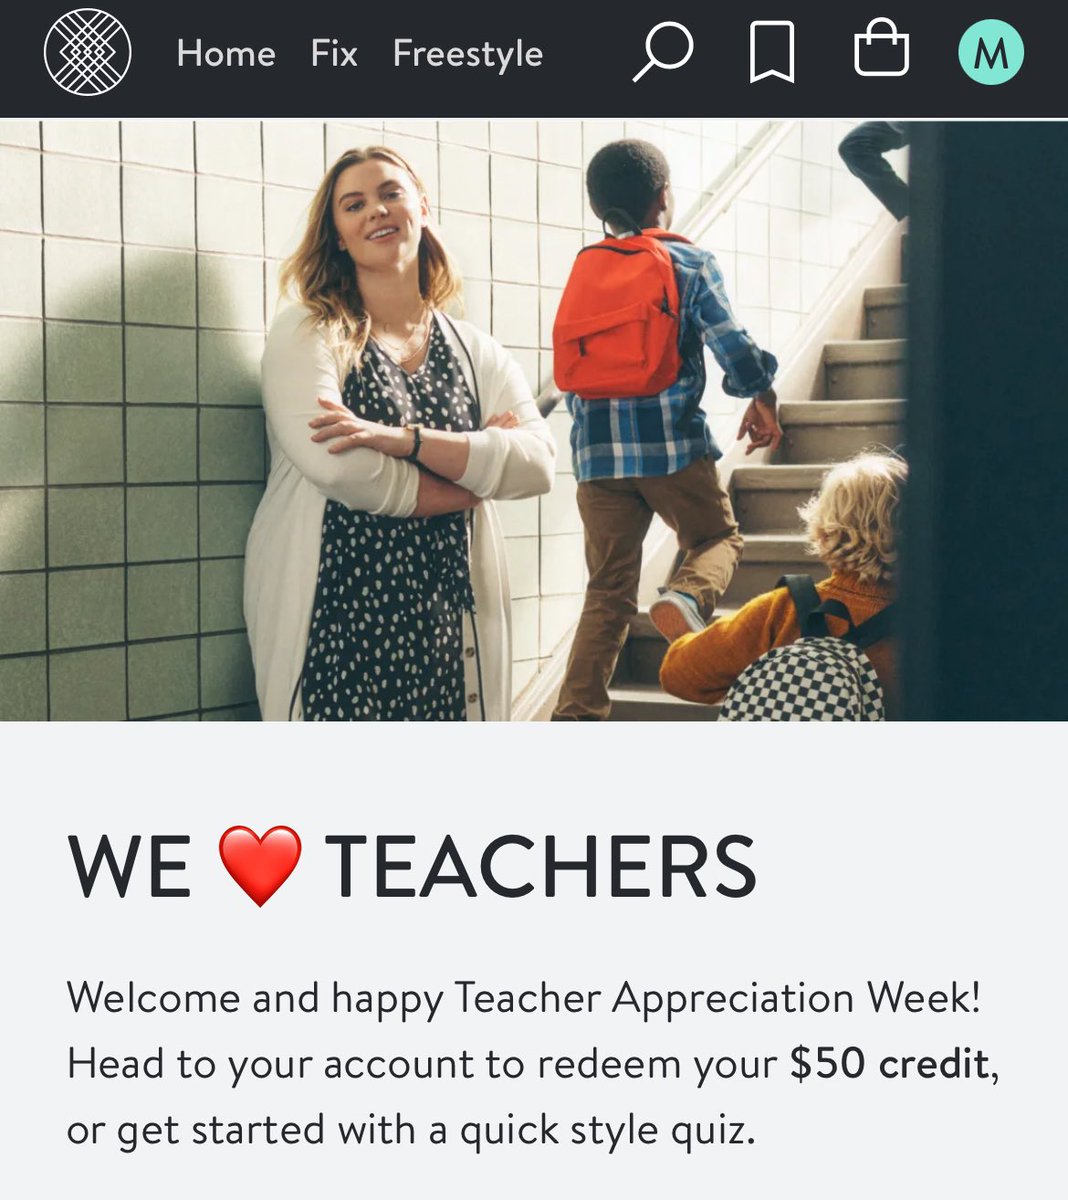 Thank you @stitchfix for the $50 credit for Teachers’ Appreciation week!